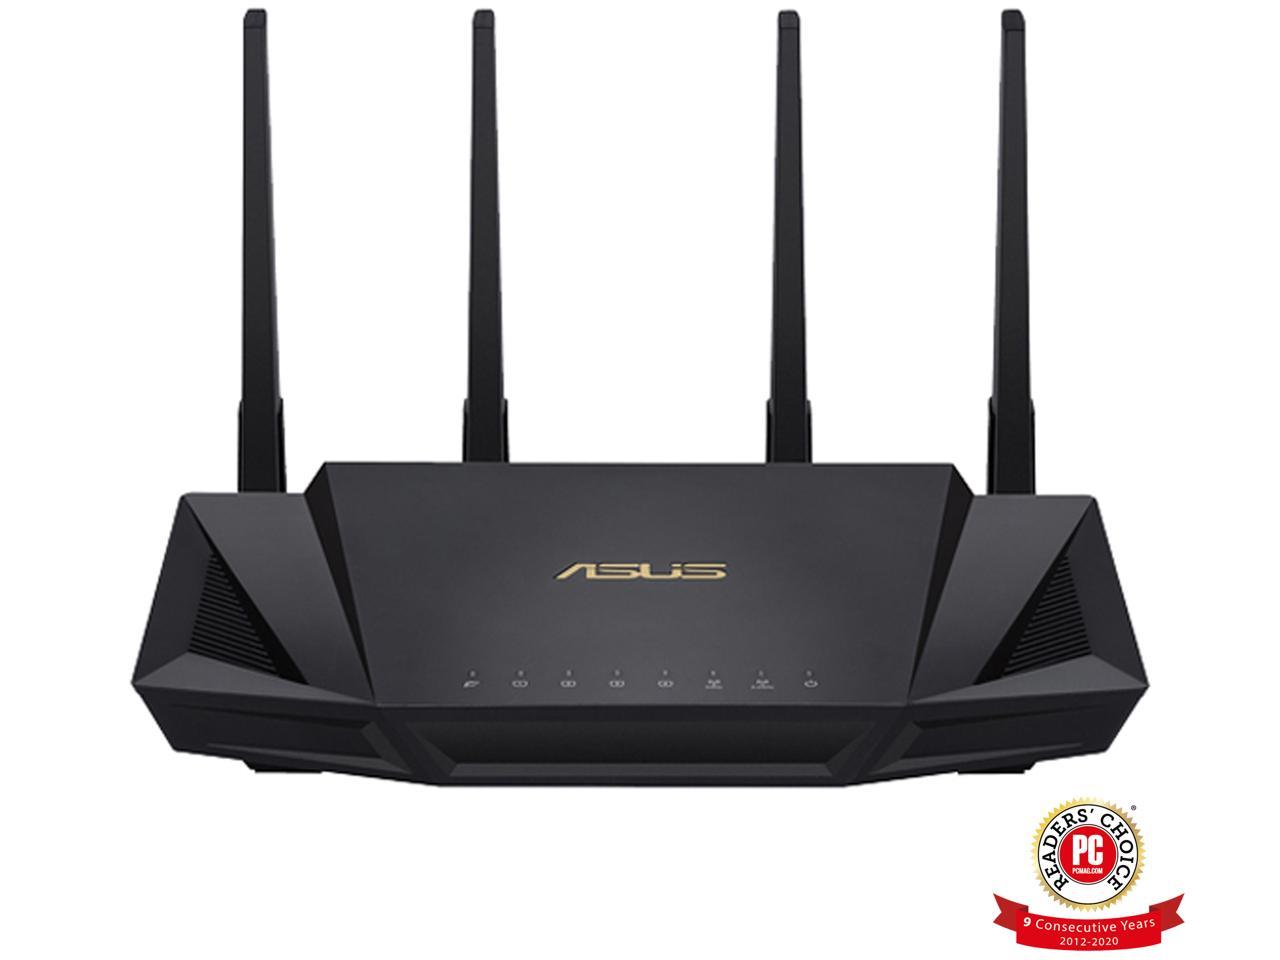 ASUS RT-AX3000 AX3000 Wi-Fi 6 Wireless Dual-Band Gigabit Router $150